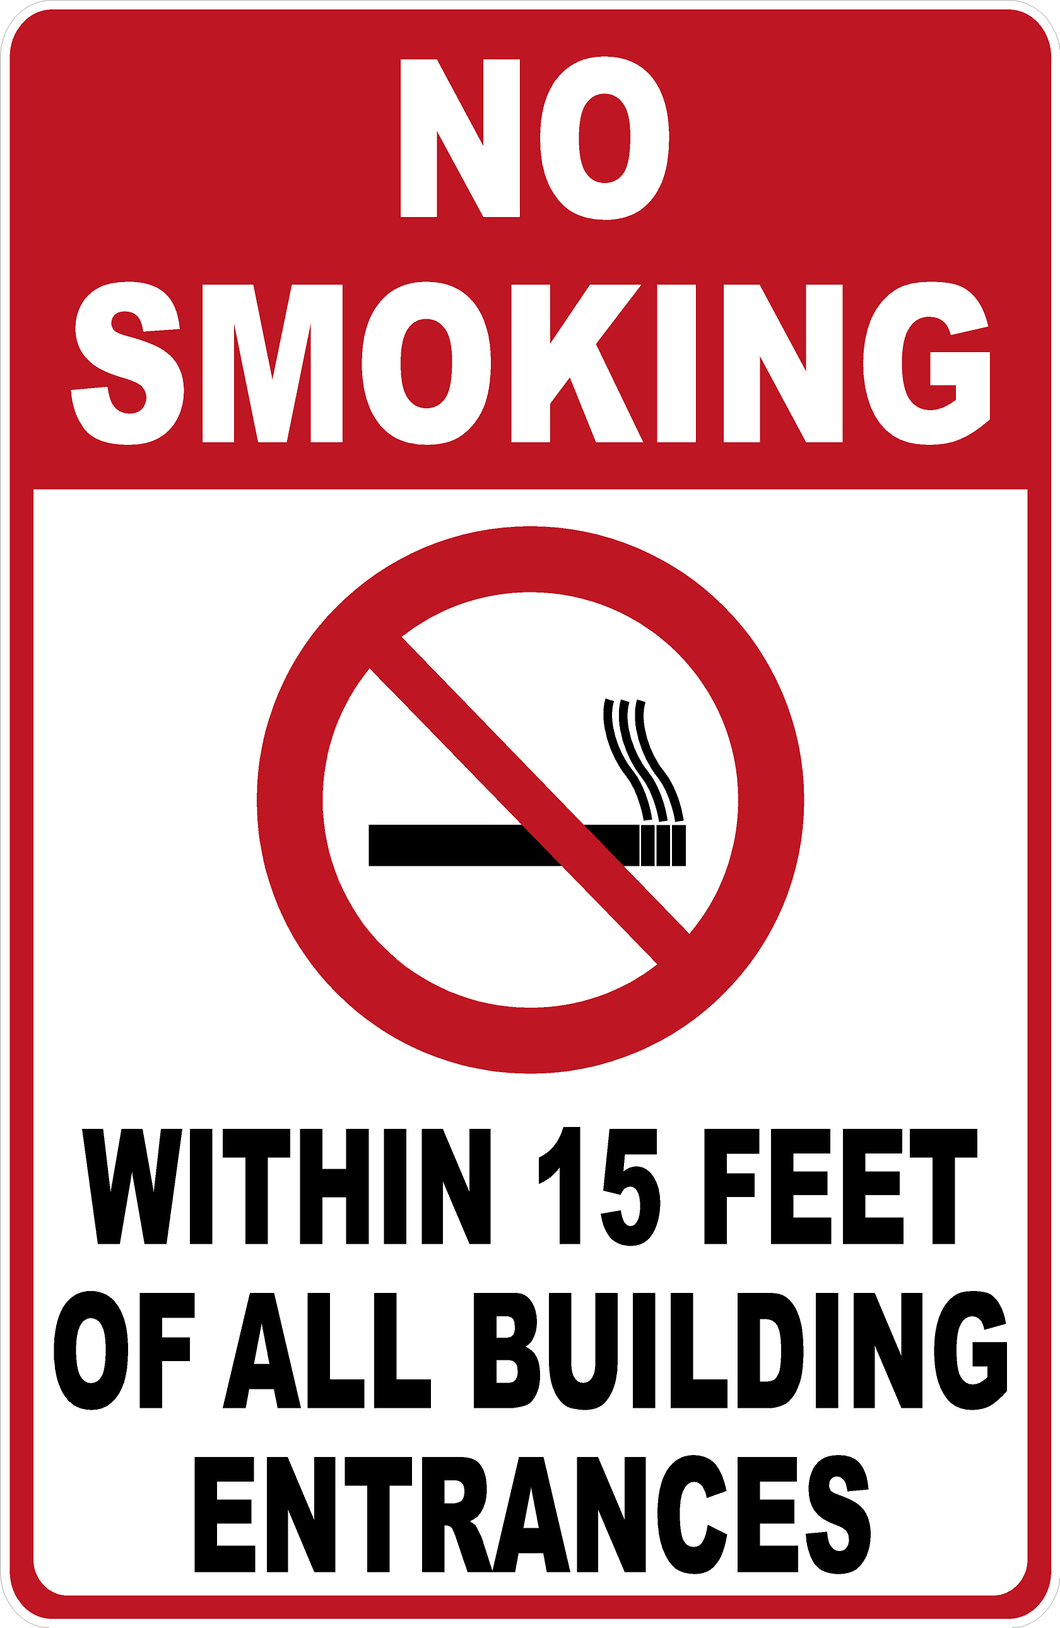 No Smoking Within 15 Feet Of All Building Entrances Sign